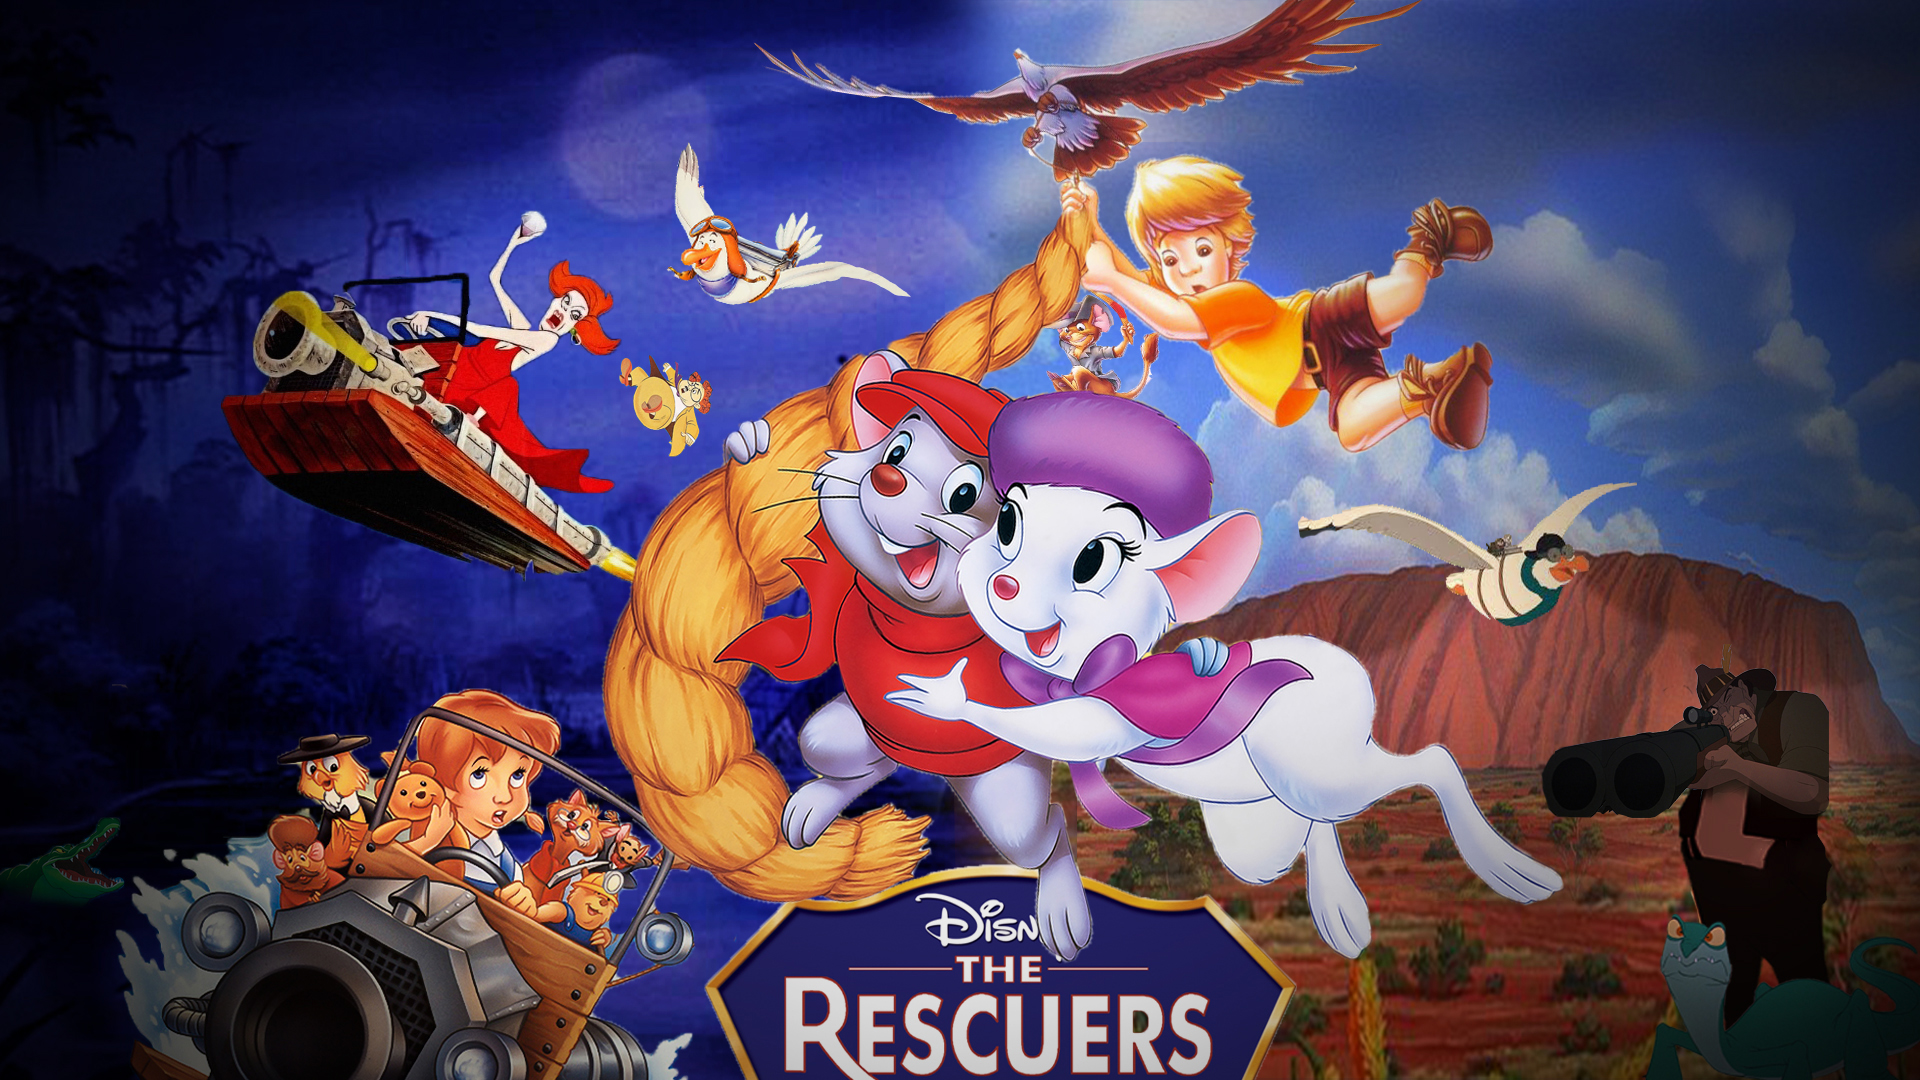 The Rescuers And Down Under Wallpaper By thekingblader995